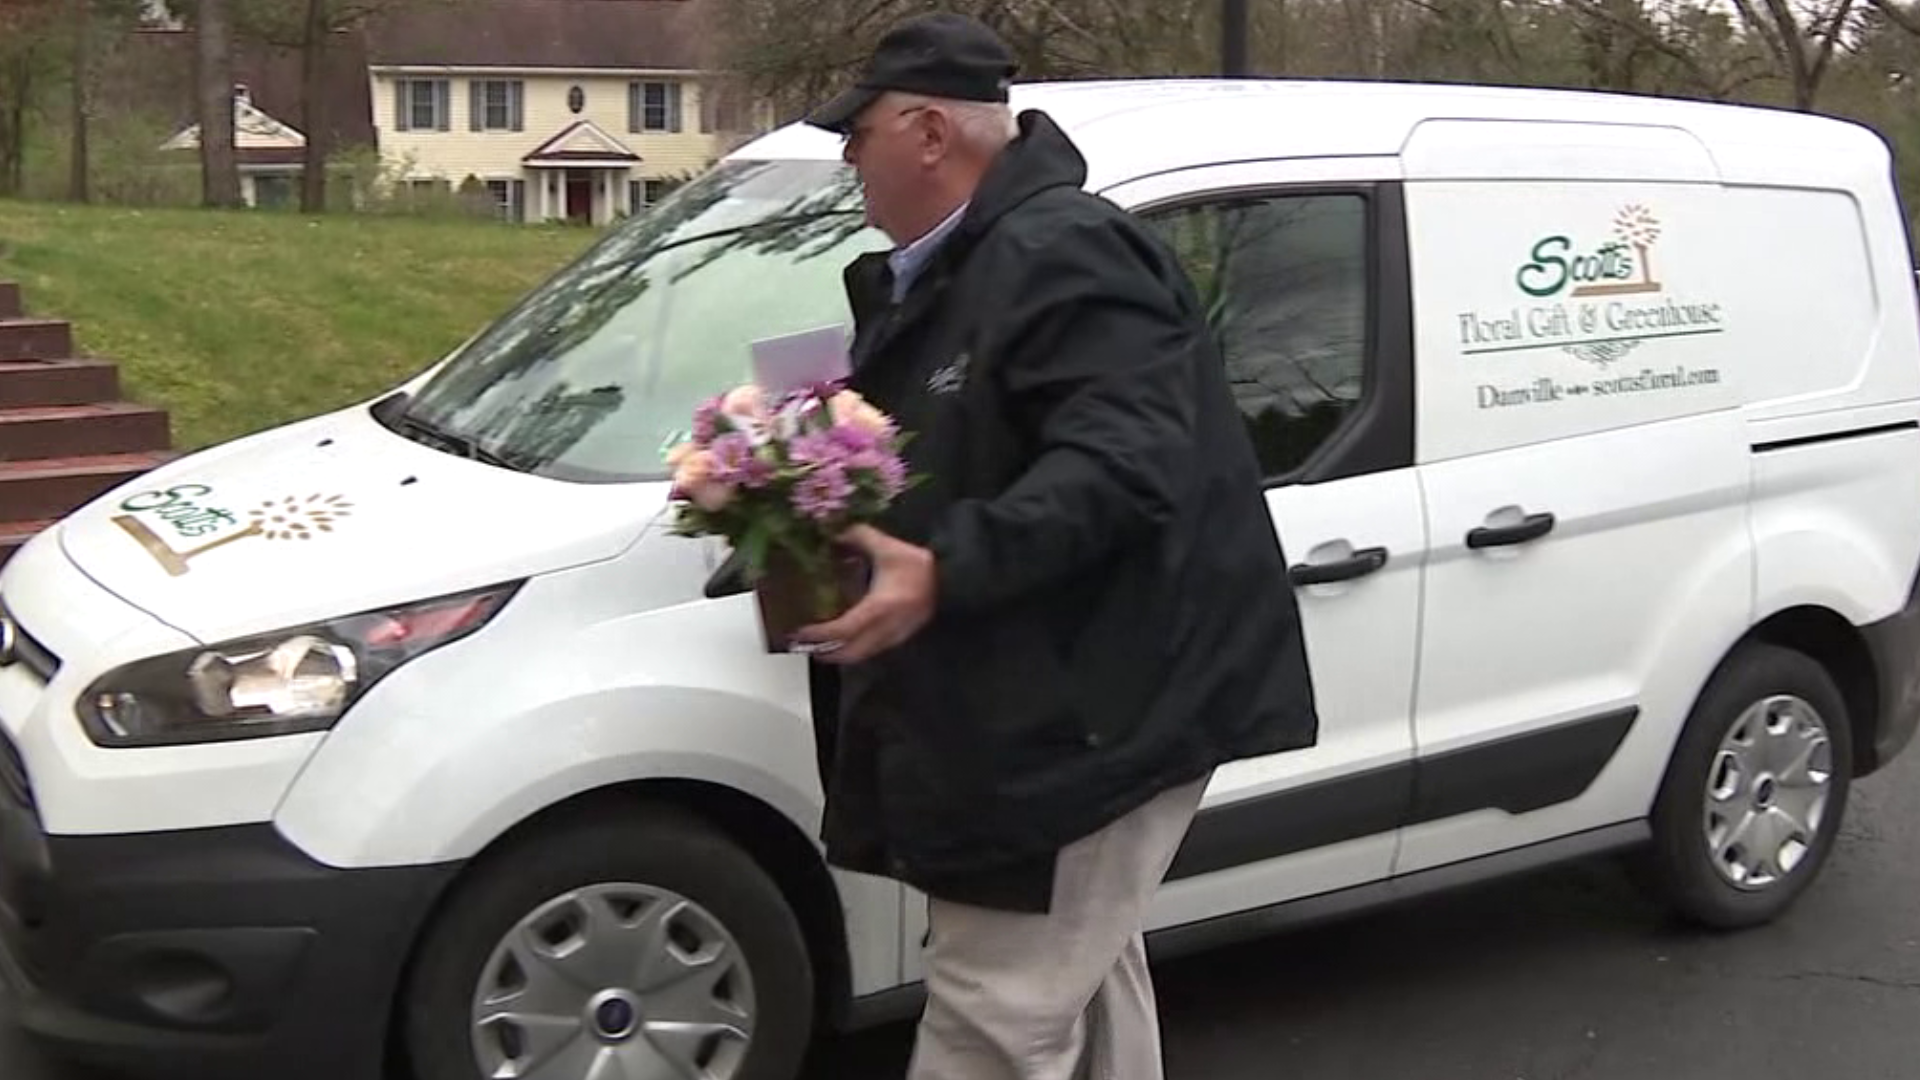 Earlier this week, Governor Wolf said florists can again make deliveries, but they must be touchless deliveries.